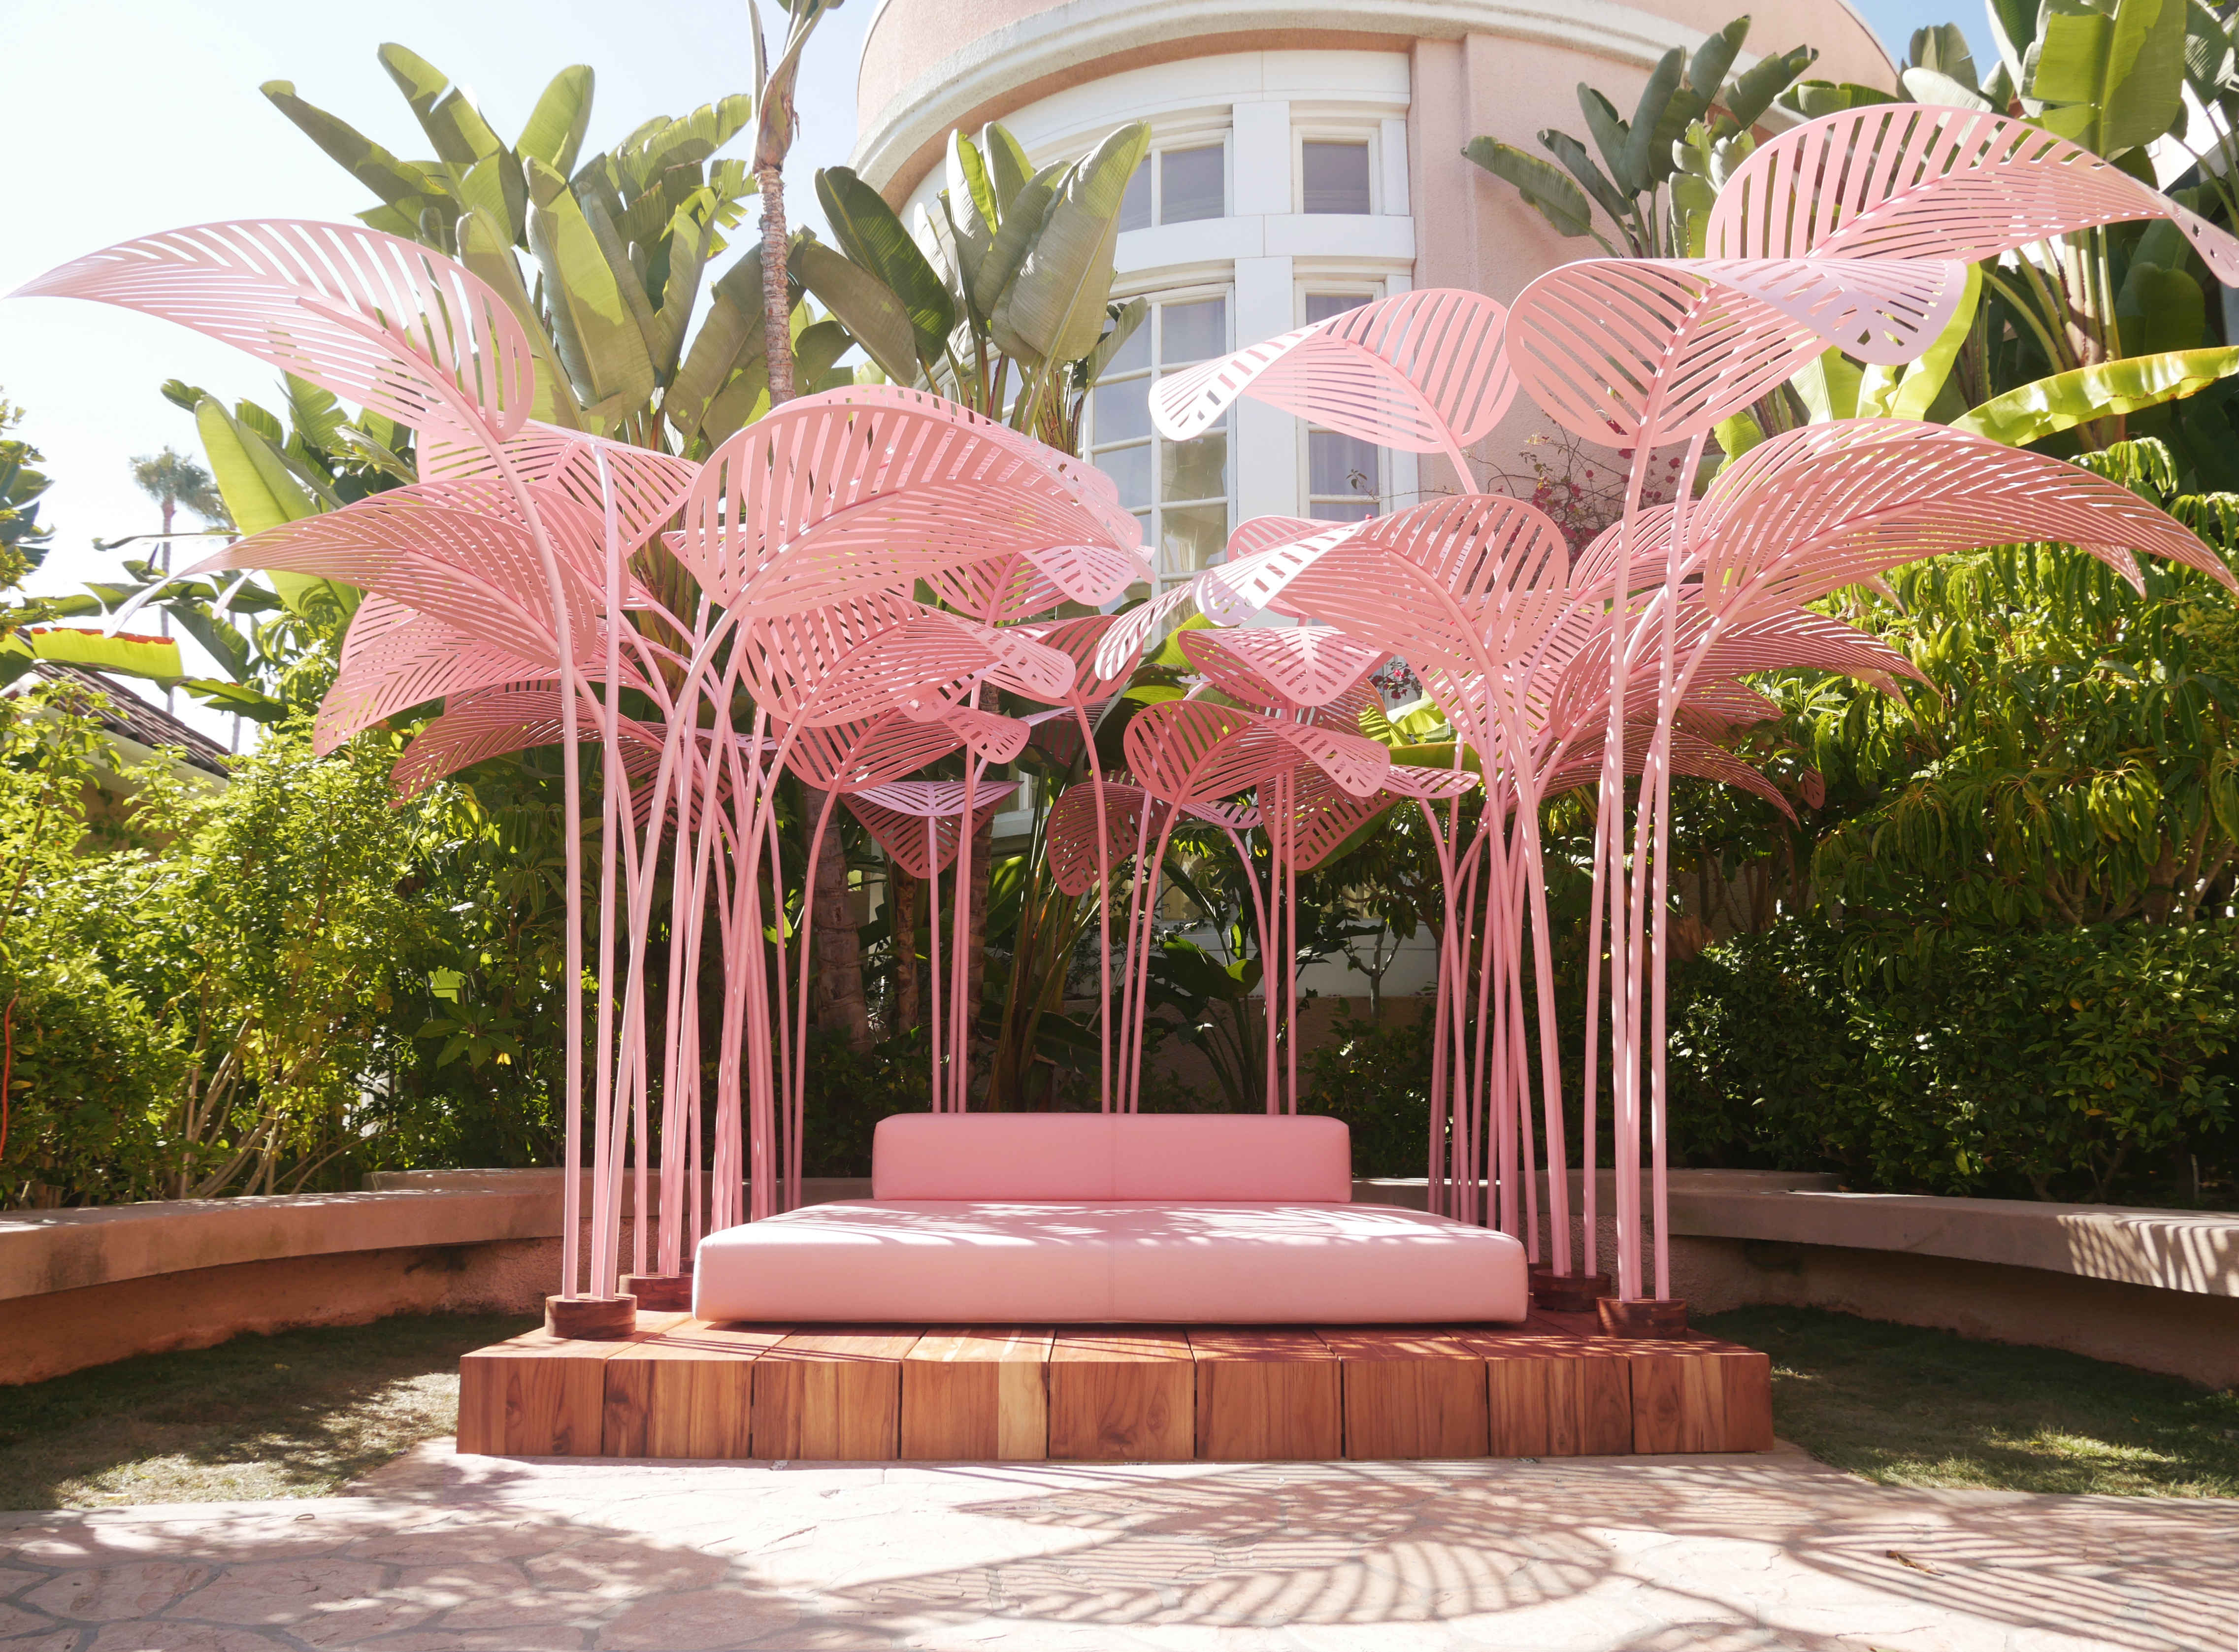 This amazing pink daybed can be found at the Beverly Hills Hotel